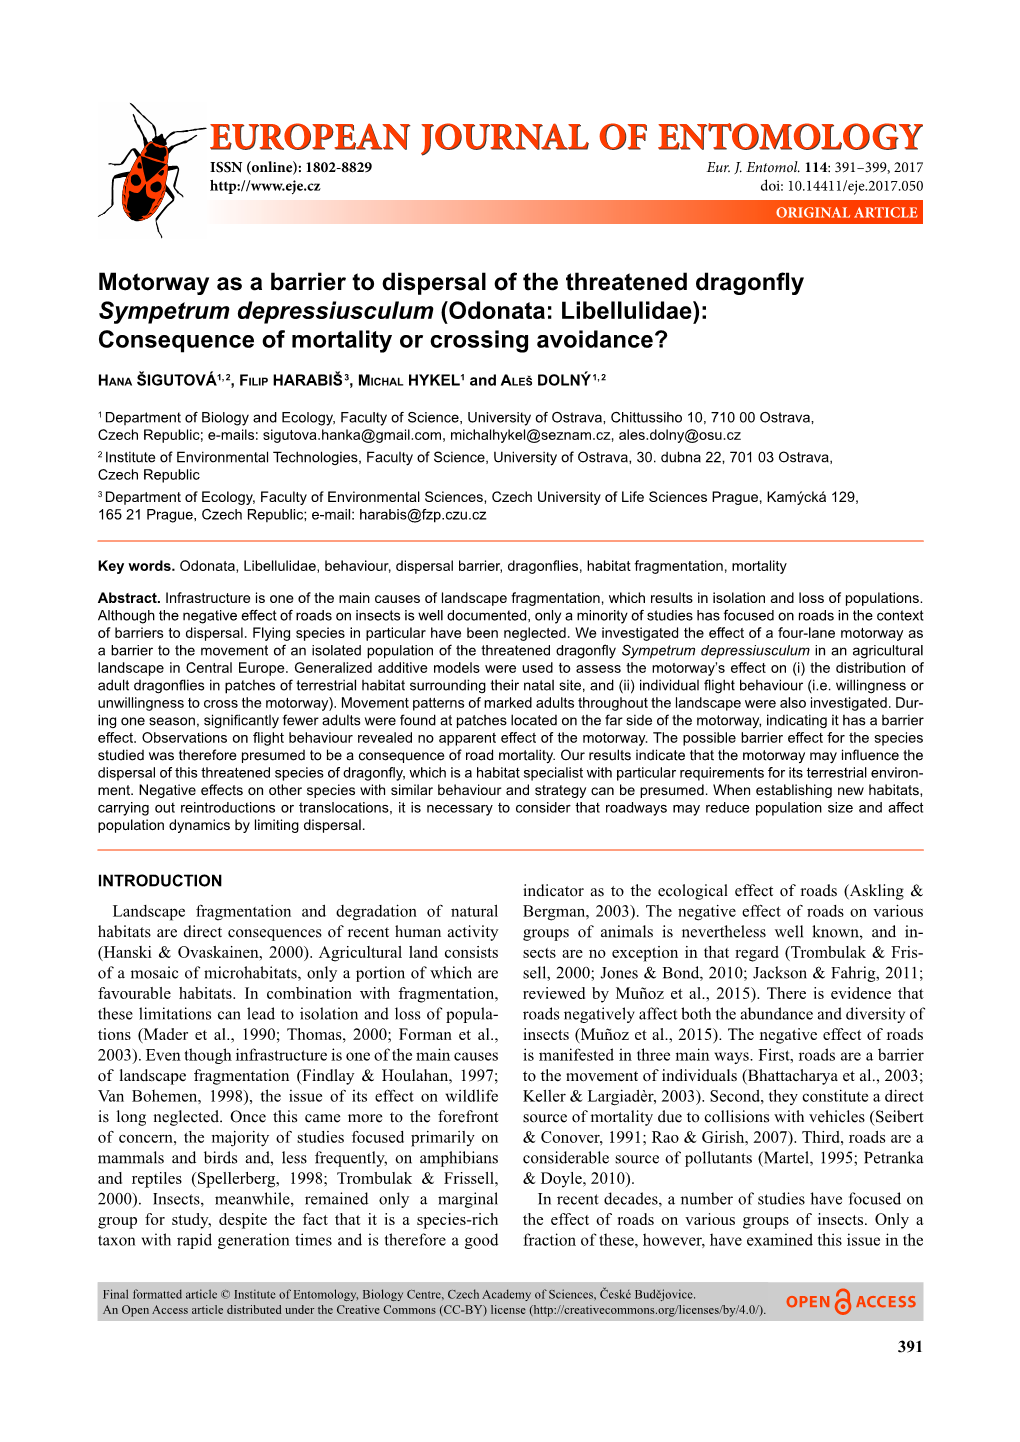 Motorway As a Barrier to Dispersal of the Threatened Dragonﬂ Y Sympetrum Depressiusculum (Odonata: Libellulidae): Consequence of Mortality Or Crossing Avoidance?